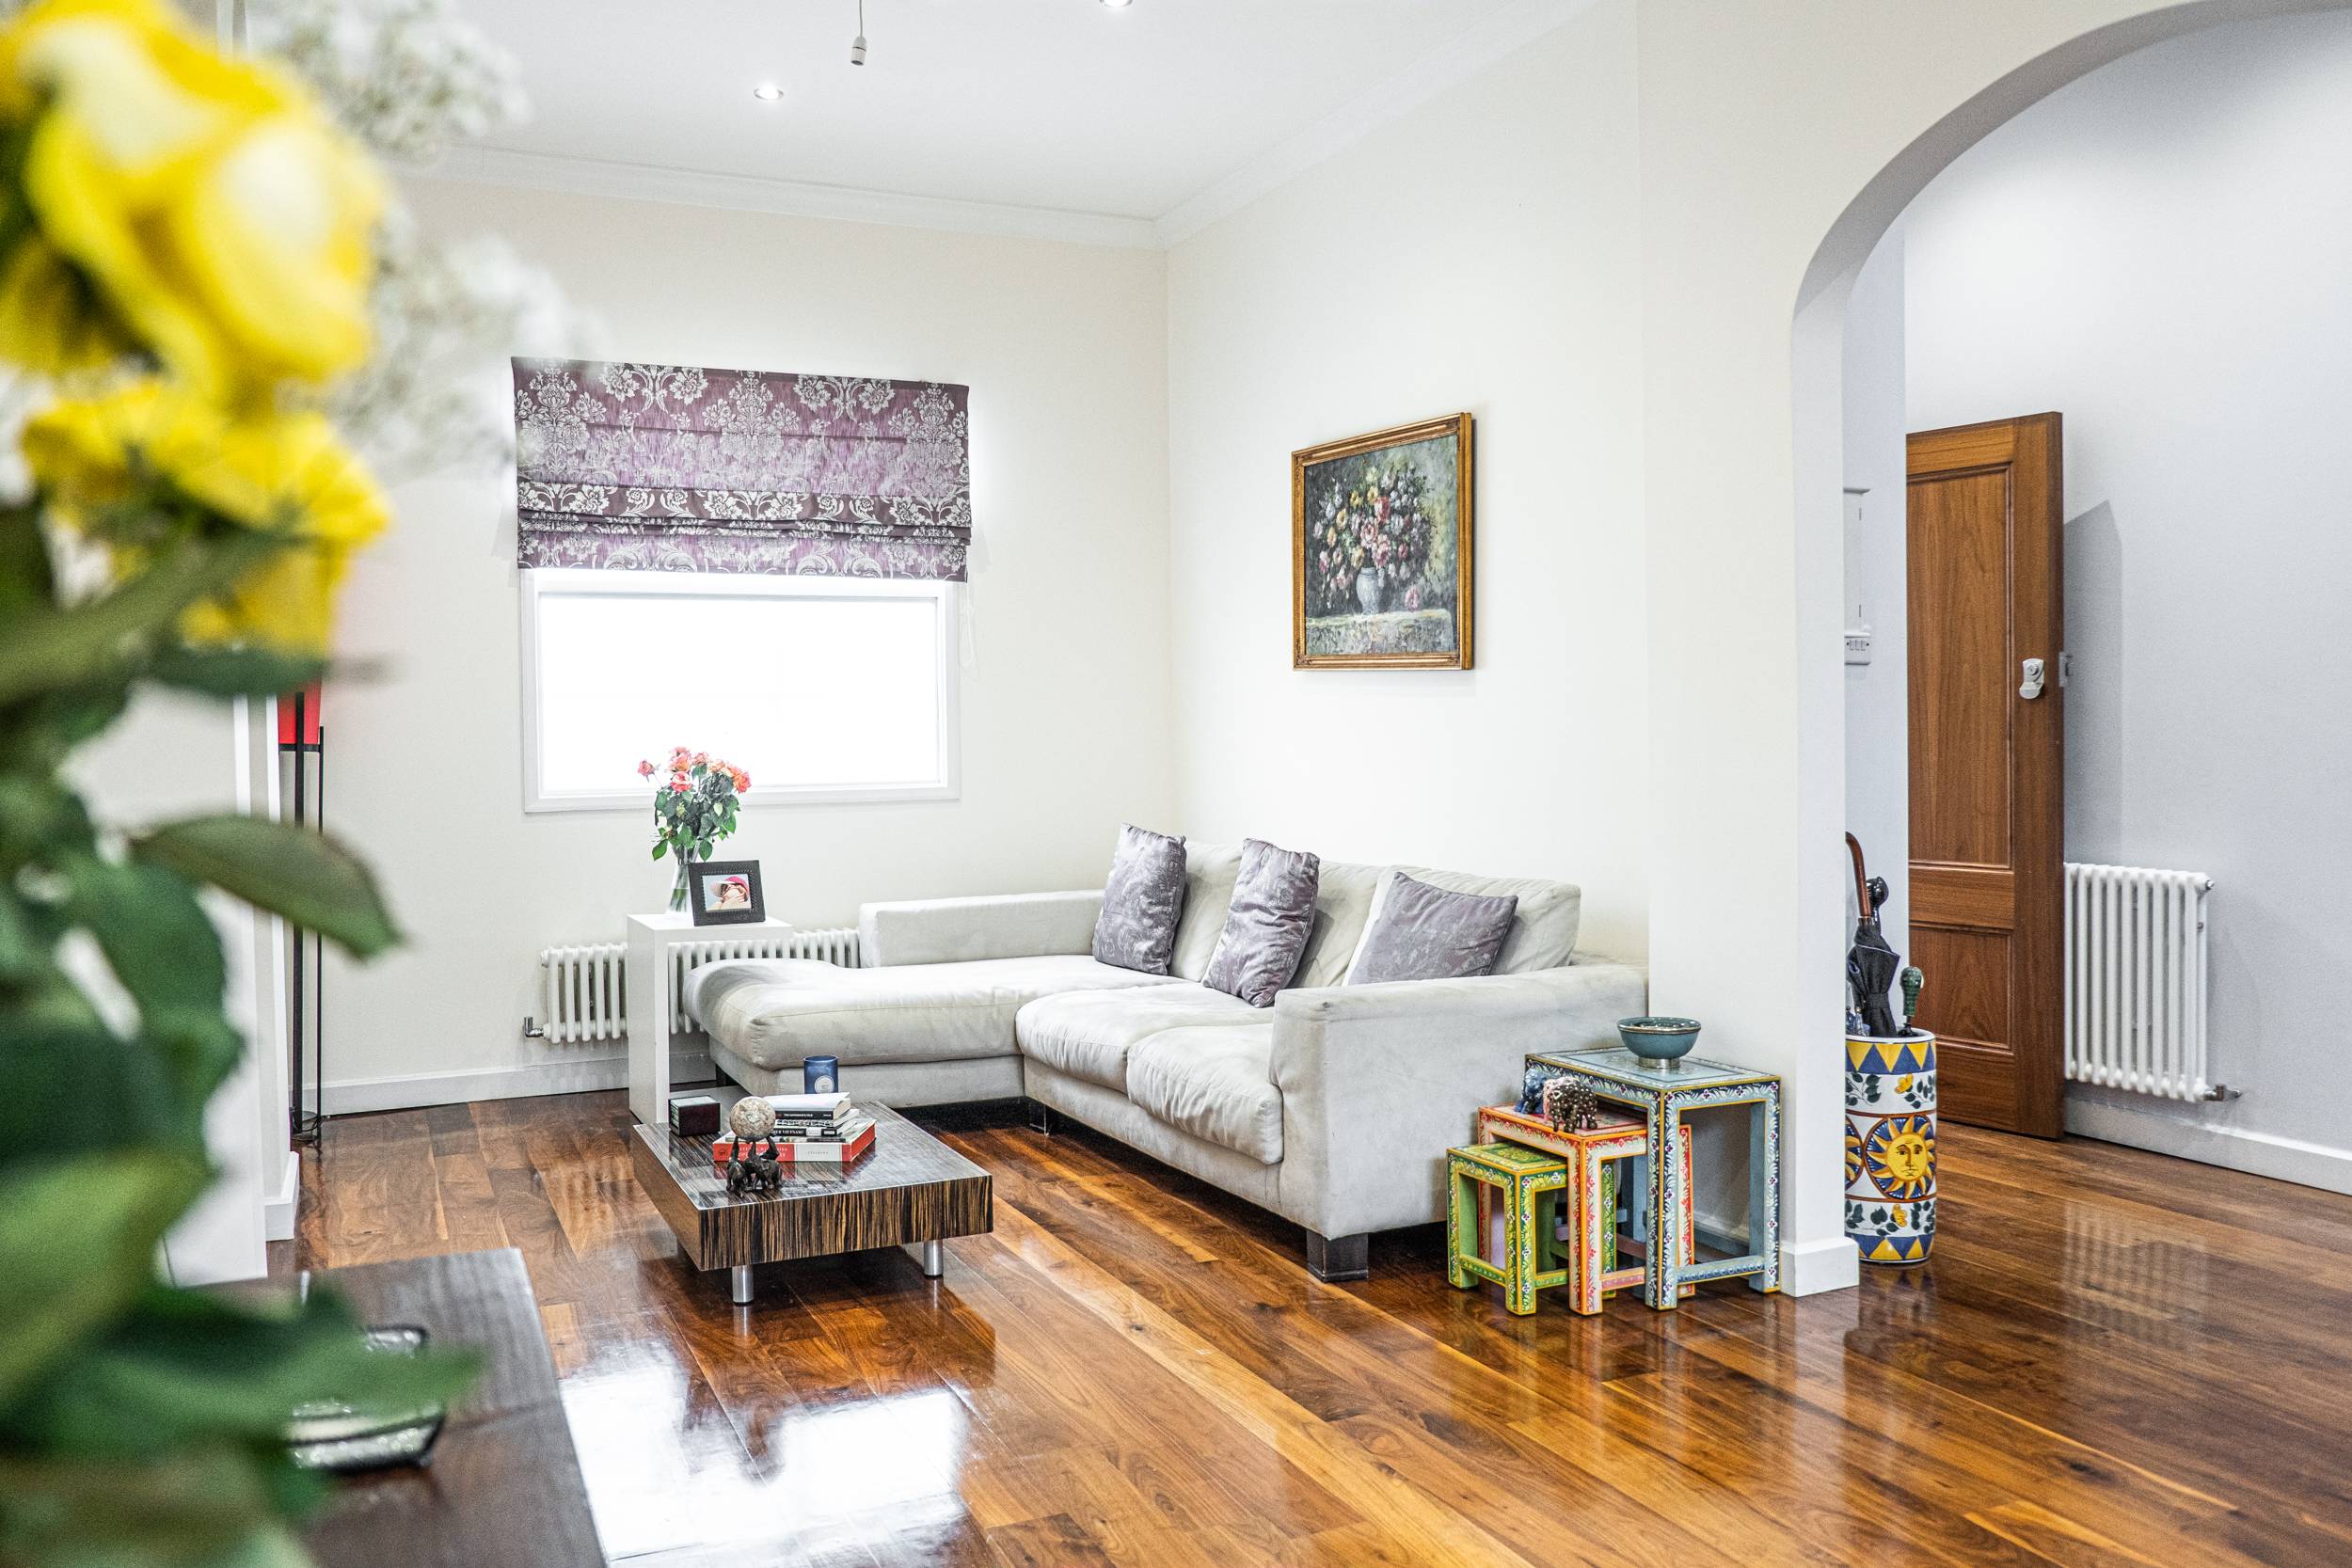 A rare opportunity to purchase a fabulous and spacious 3 bedroom freehold house conveniently located in Kensington, with a beautiful roof terrace.